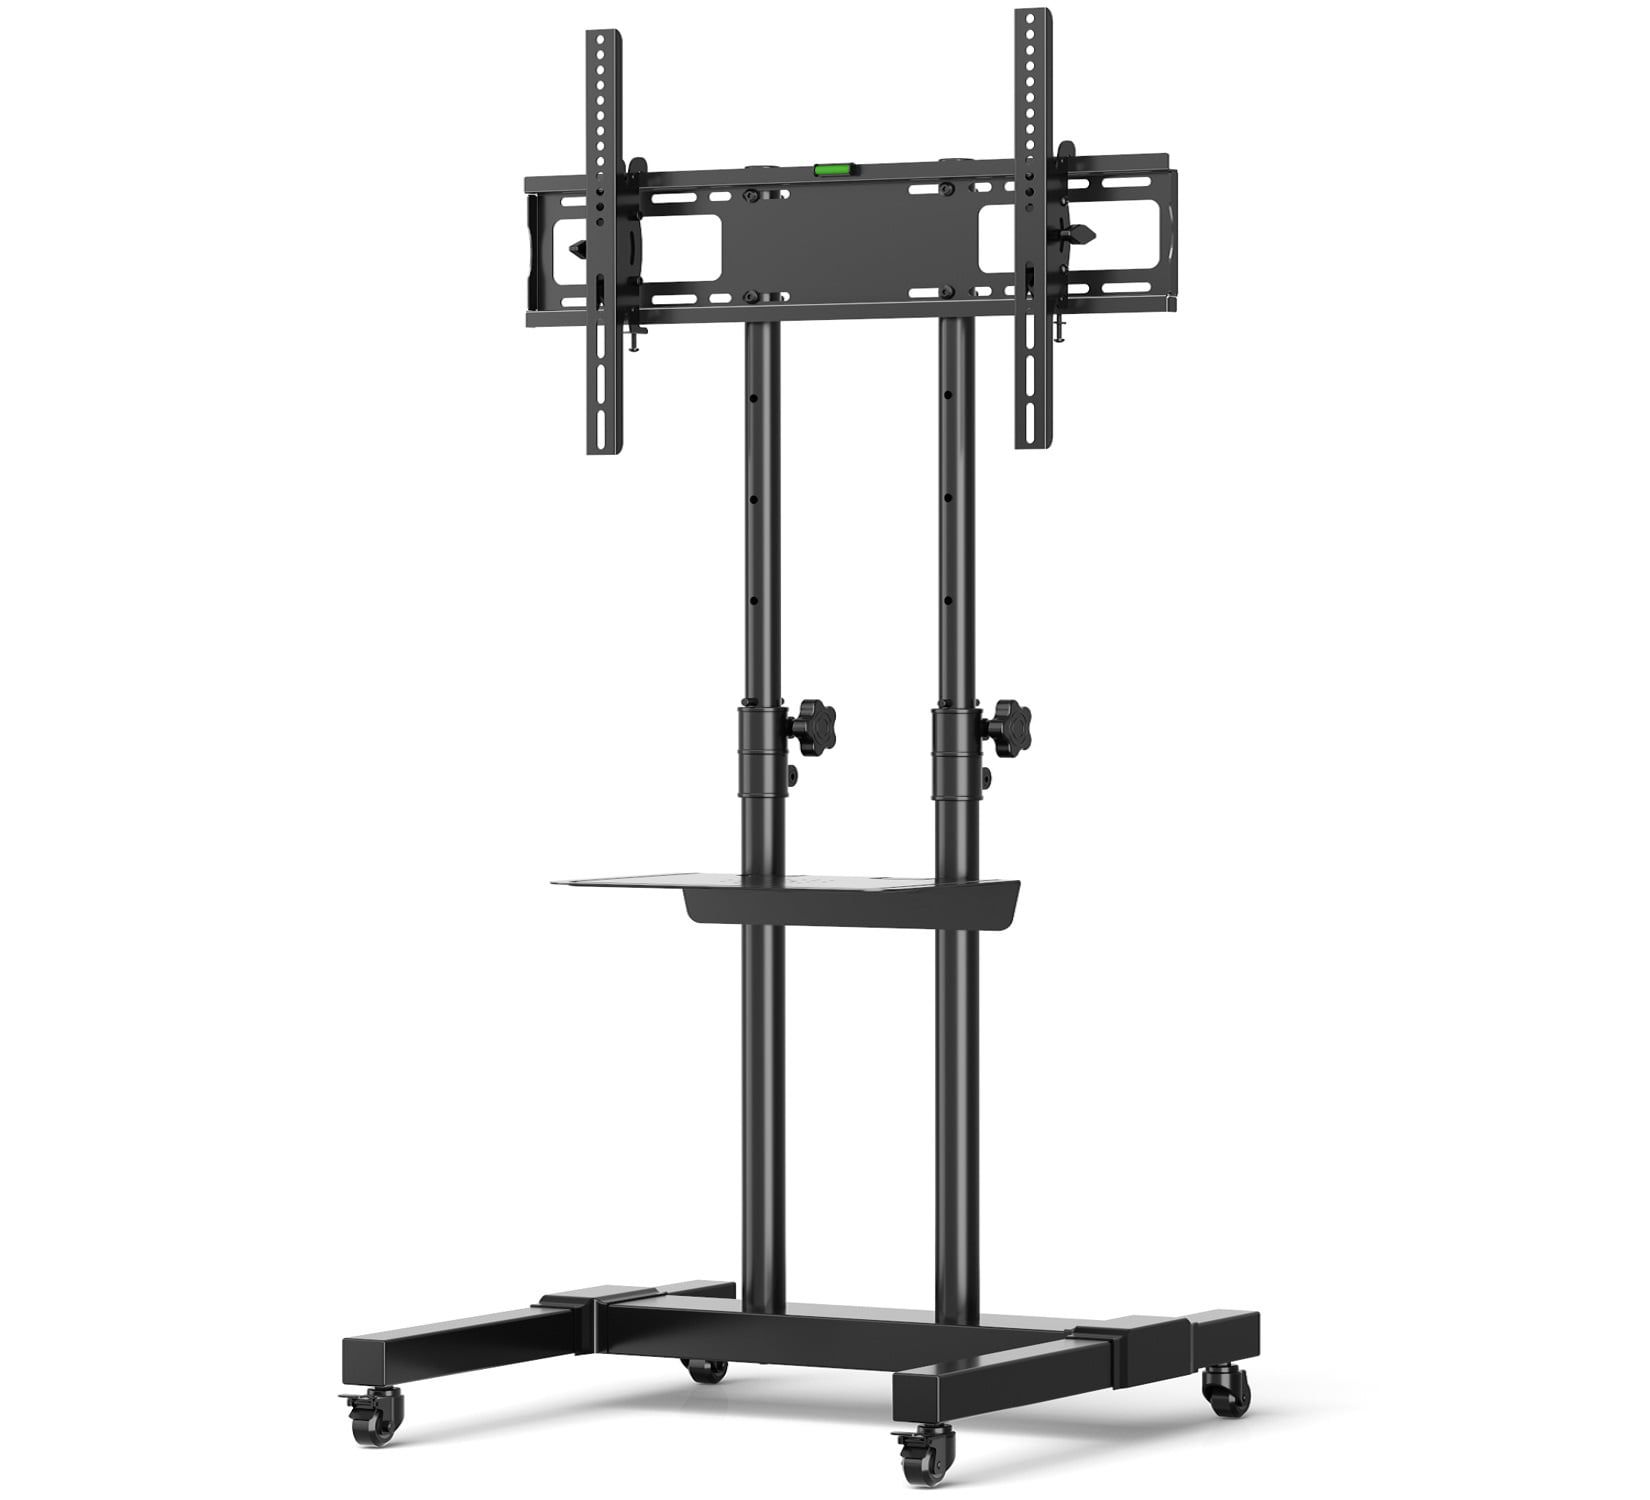 Modern Mobile Rolling Tv Stand For Tvs Up To 70" Height Adjustable With Regard To Mobile Tilt Rolling Tv Stands (View 8 of 20)